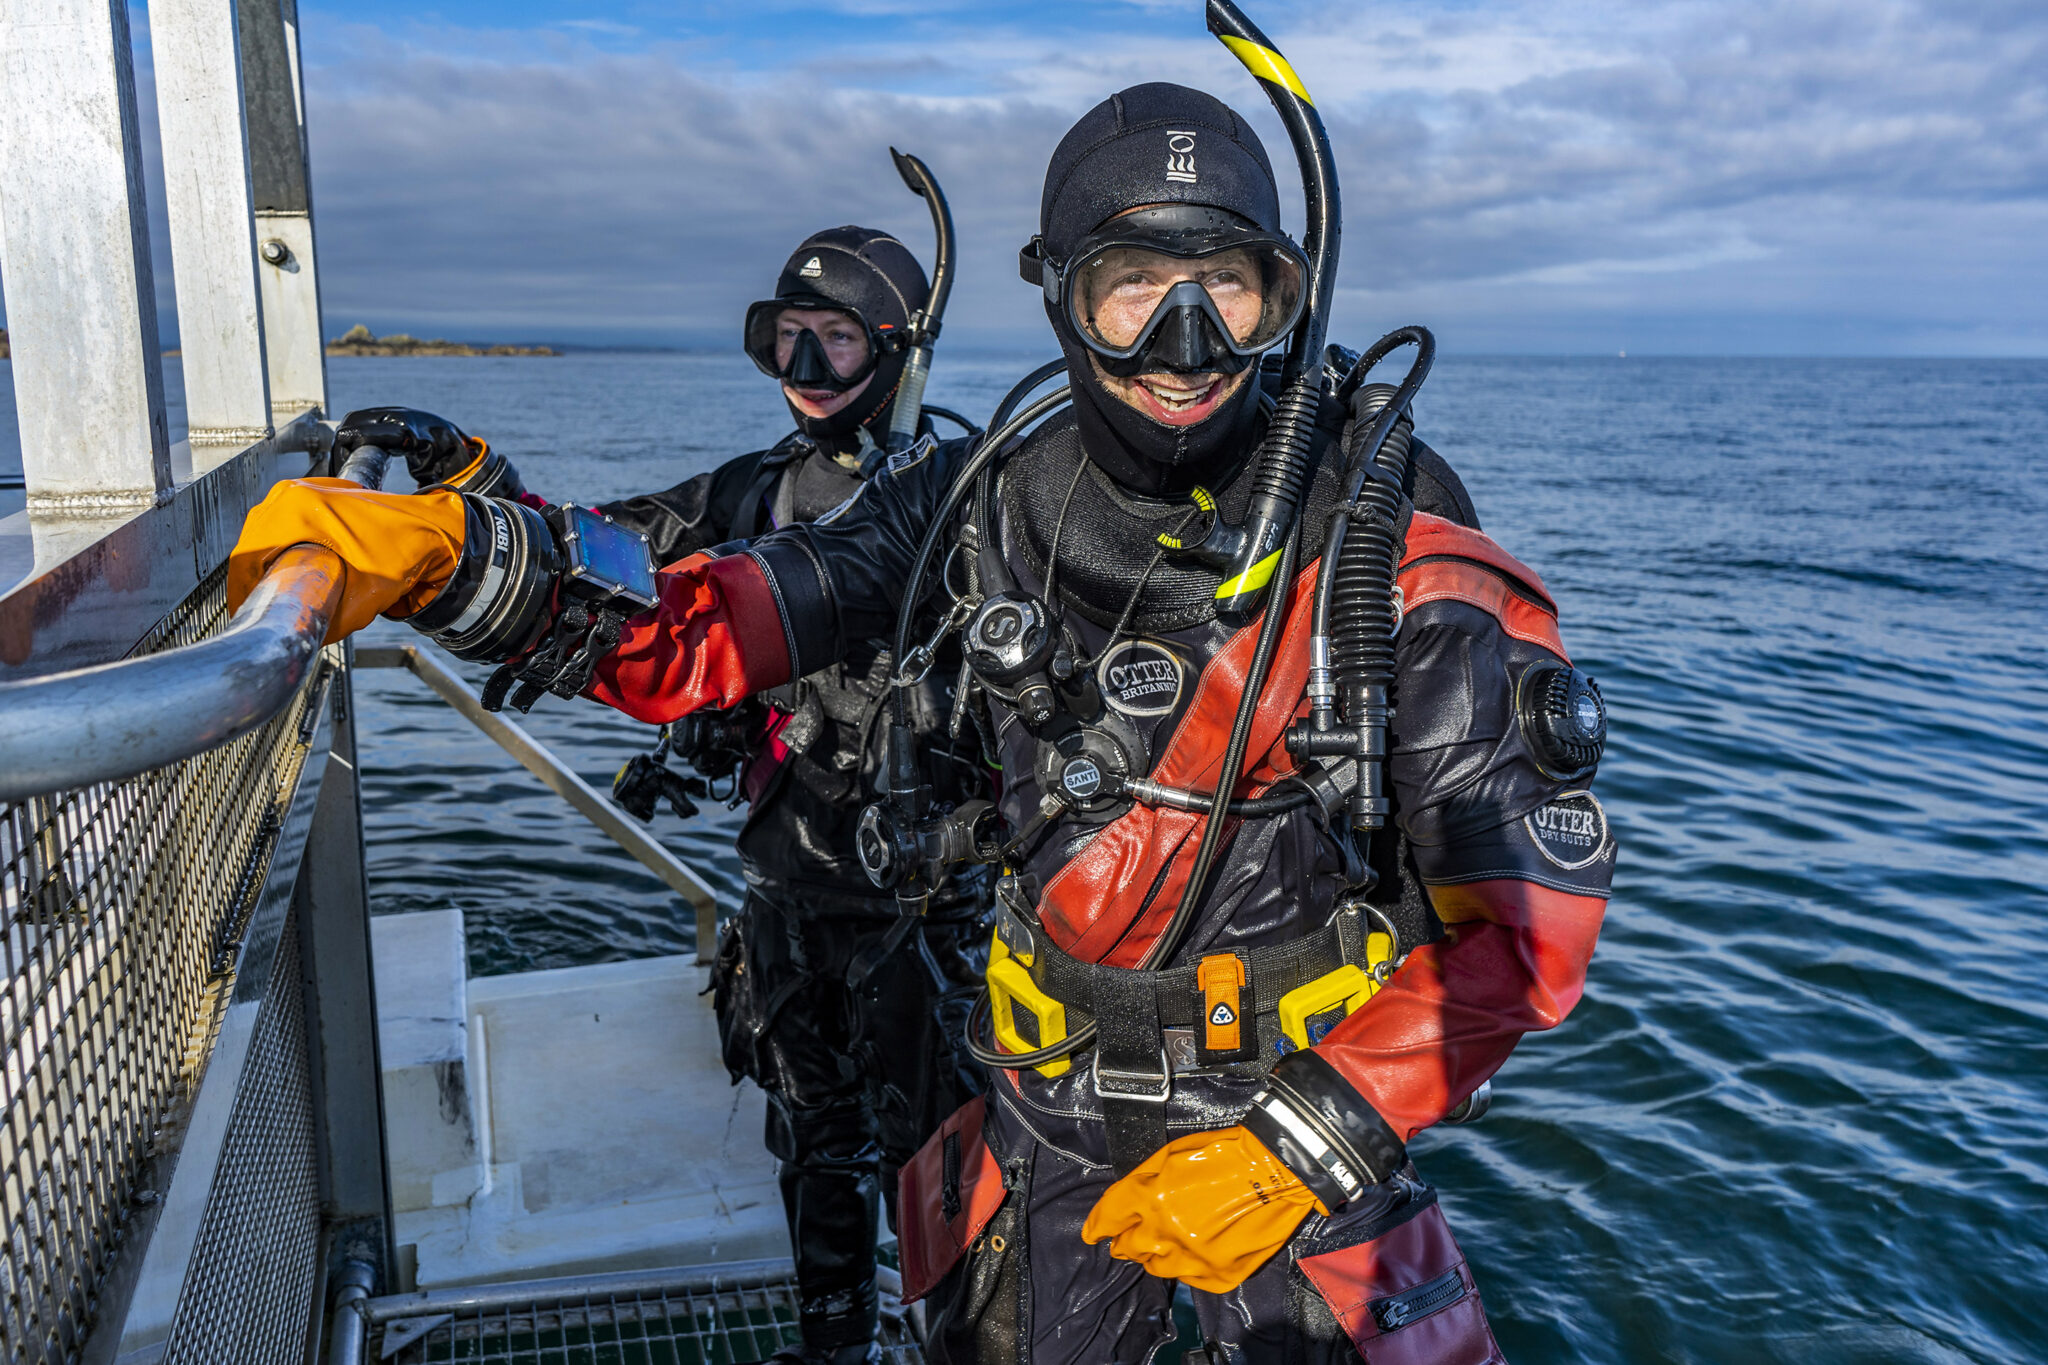 A certified PADI Dry Suit Diver who has learned how does a dry suit work and the difference between a wetsuit and a drysuit